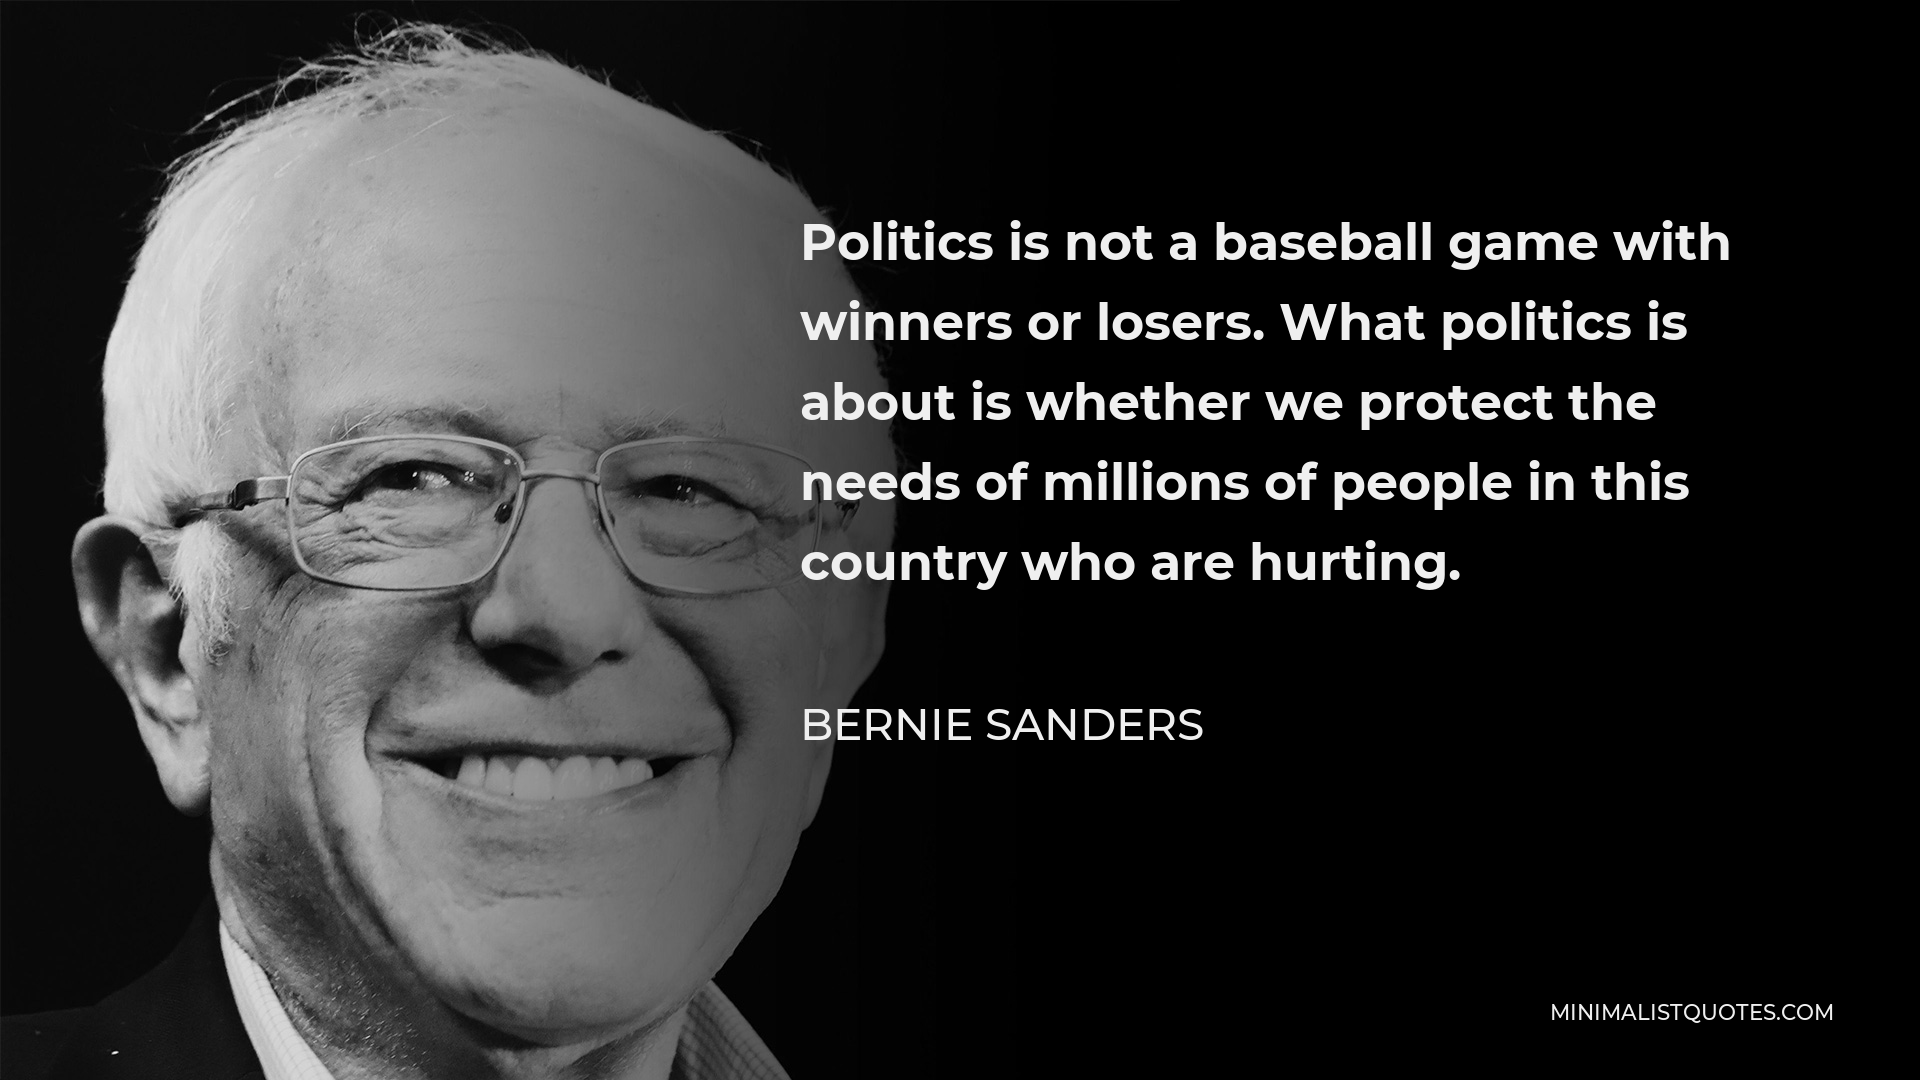 Bernie Sanders Quote - Politics is not a baseball game with winners or losers. What politics is about is whether we protect the needs of millions of people in this country who are hurting.